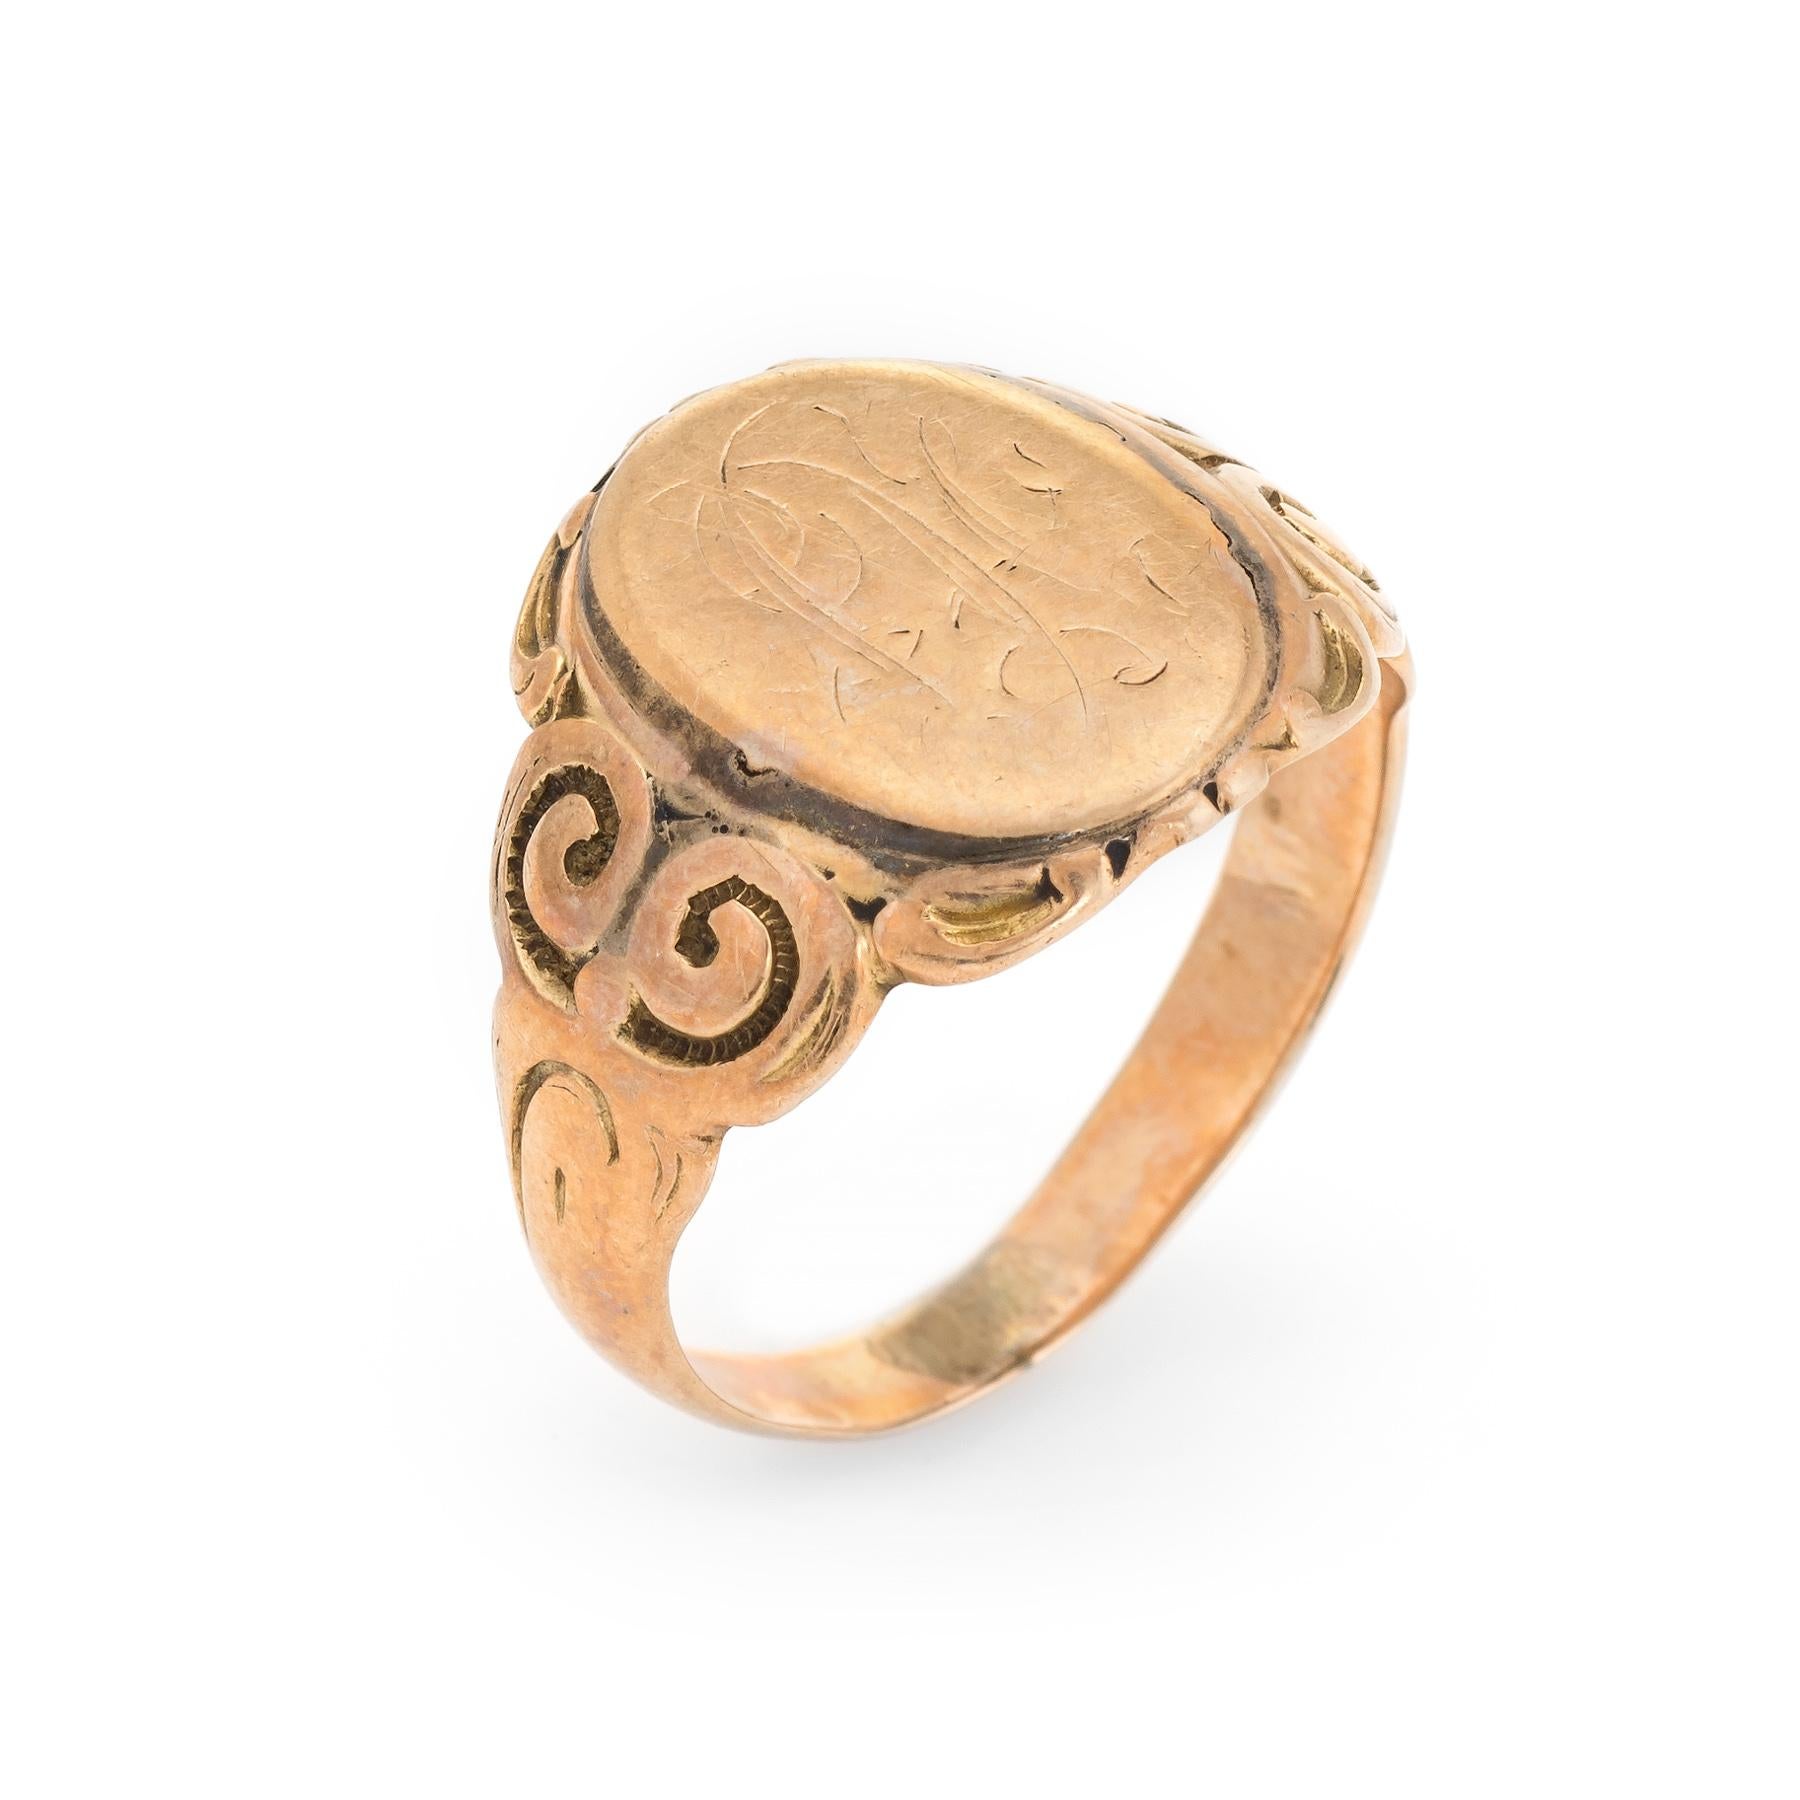 Lovely antique Victorian signet ring (circa 1880s to 1900s), crafted in 10 karat rose gold. 

The center oval is inscribed yet due to wear we are unable to decipher the letters. 

The side shoulders feature a pretty swirling design that terminates